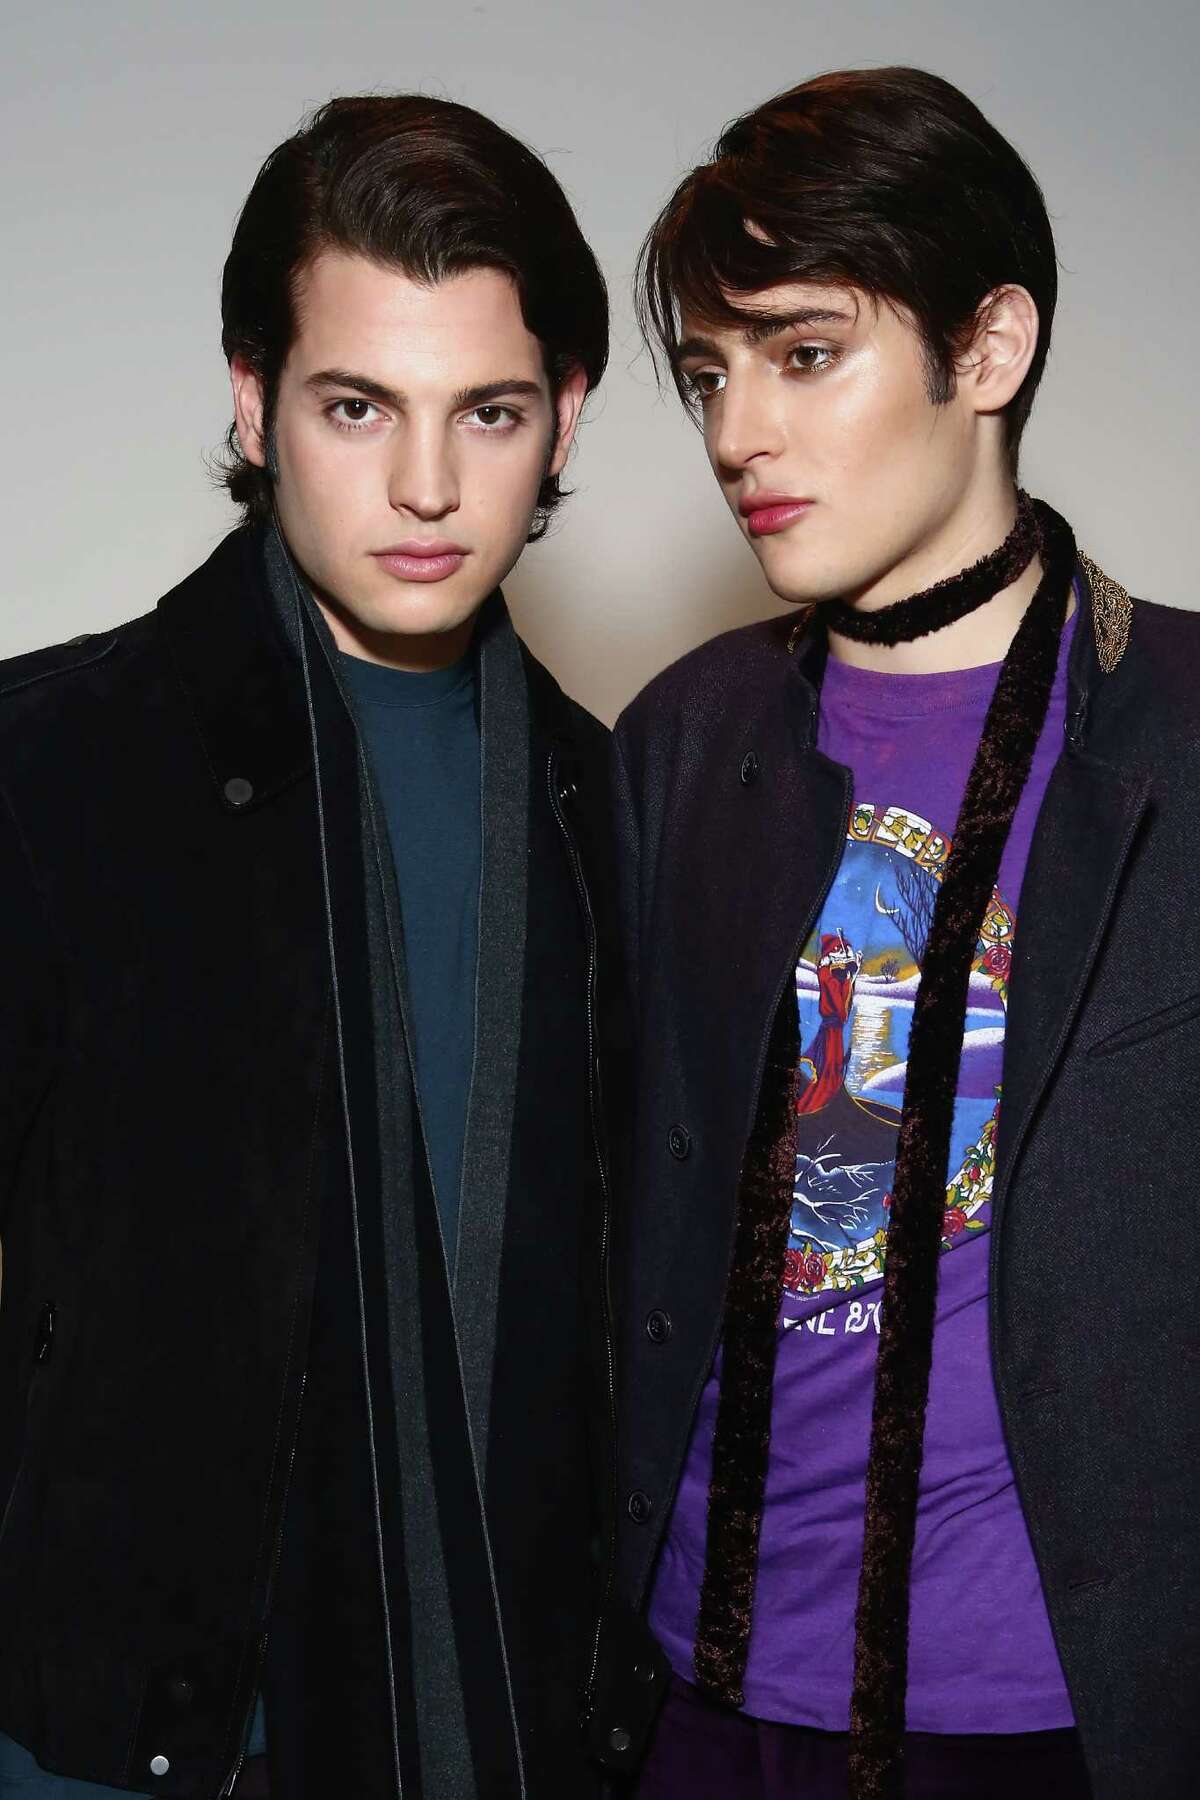 Peter and Harry Brant debut their new M.A.C. Cosmetics collection at M.A.C. Pro Store on March 9, 2016 in New York City. Peter Brant Jr. was held at JFK airport on Wednesday, March 23, 2-16 after an incident with a Port Authority officer.